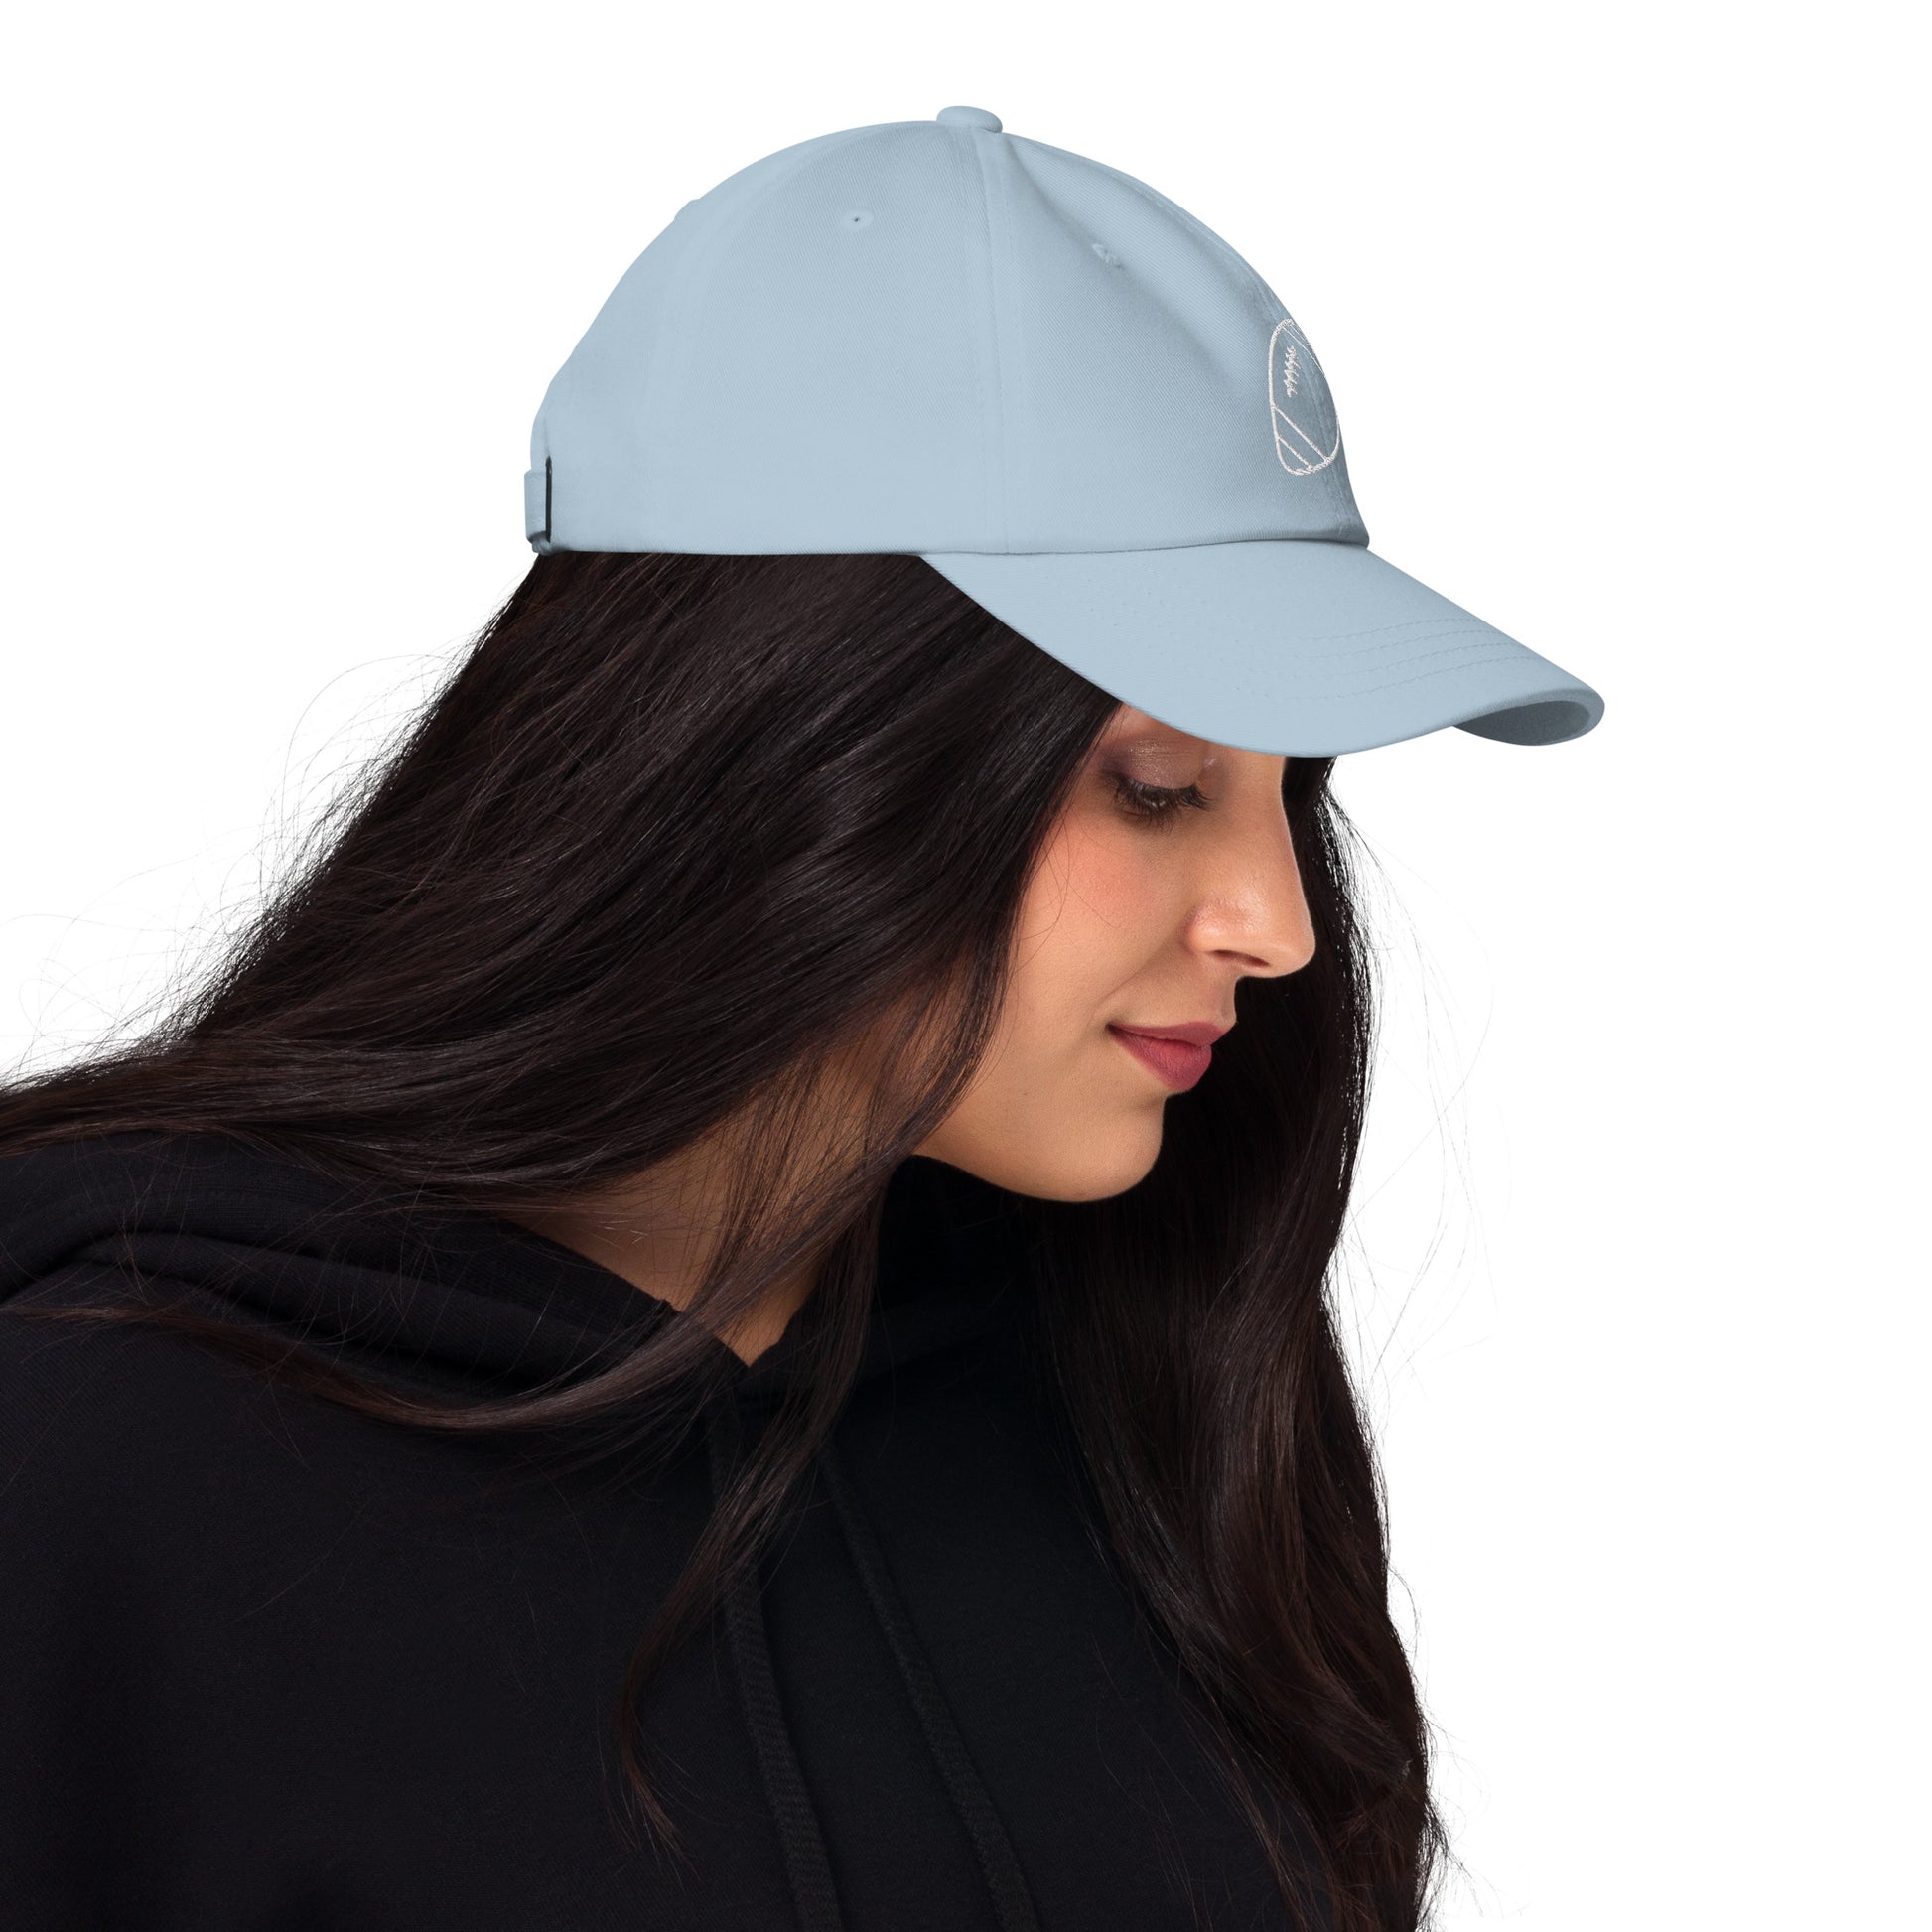 women with light blue baseball cap with football